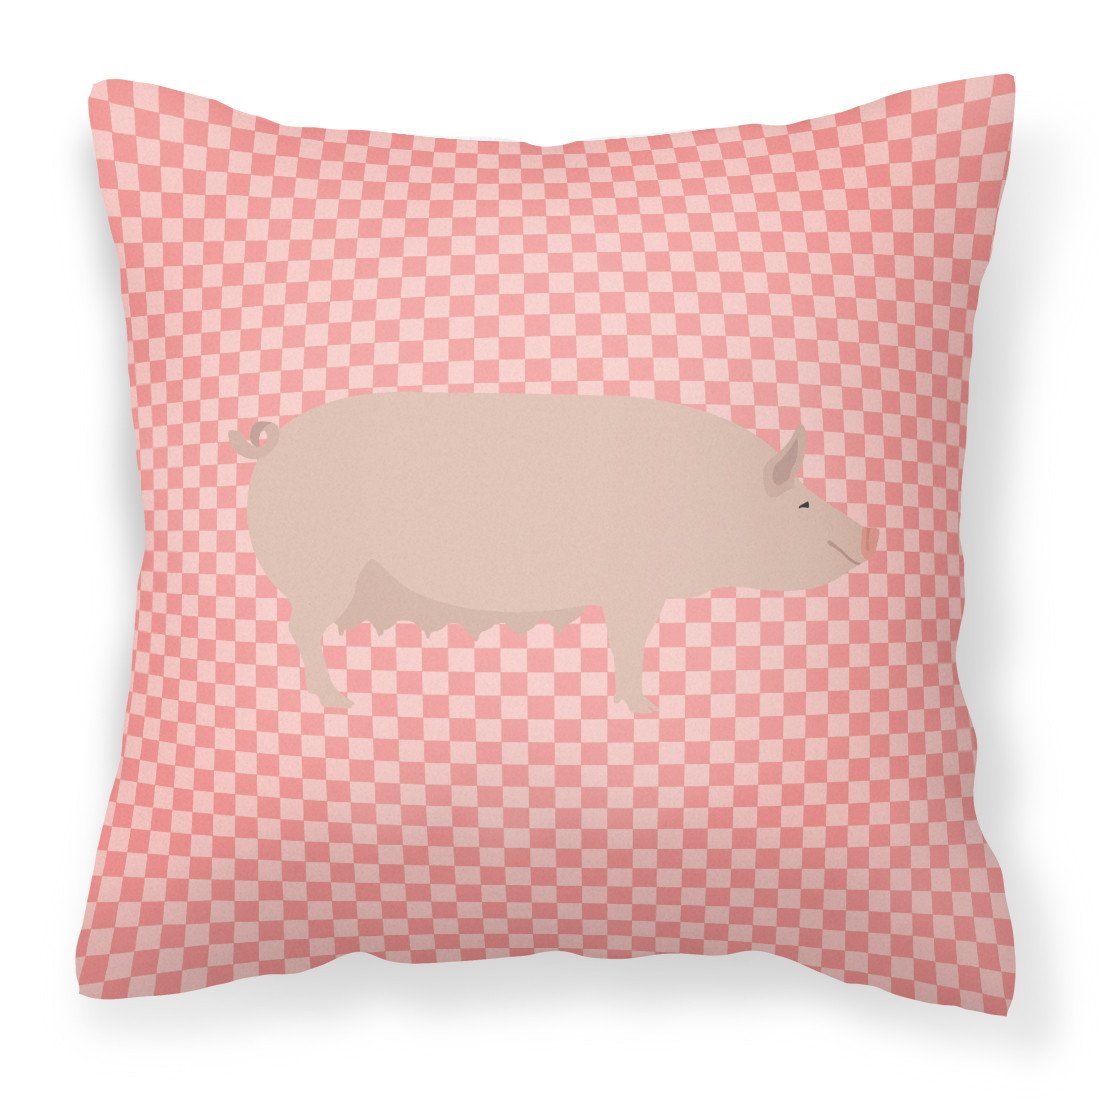 English Large White Pig Pink Check Fabric Decorative Pillow BB7938PW1818 by Caroline's Treasures